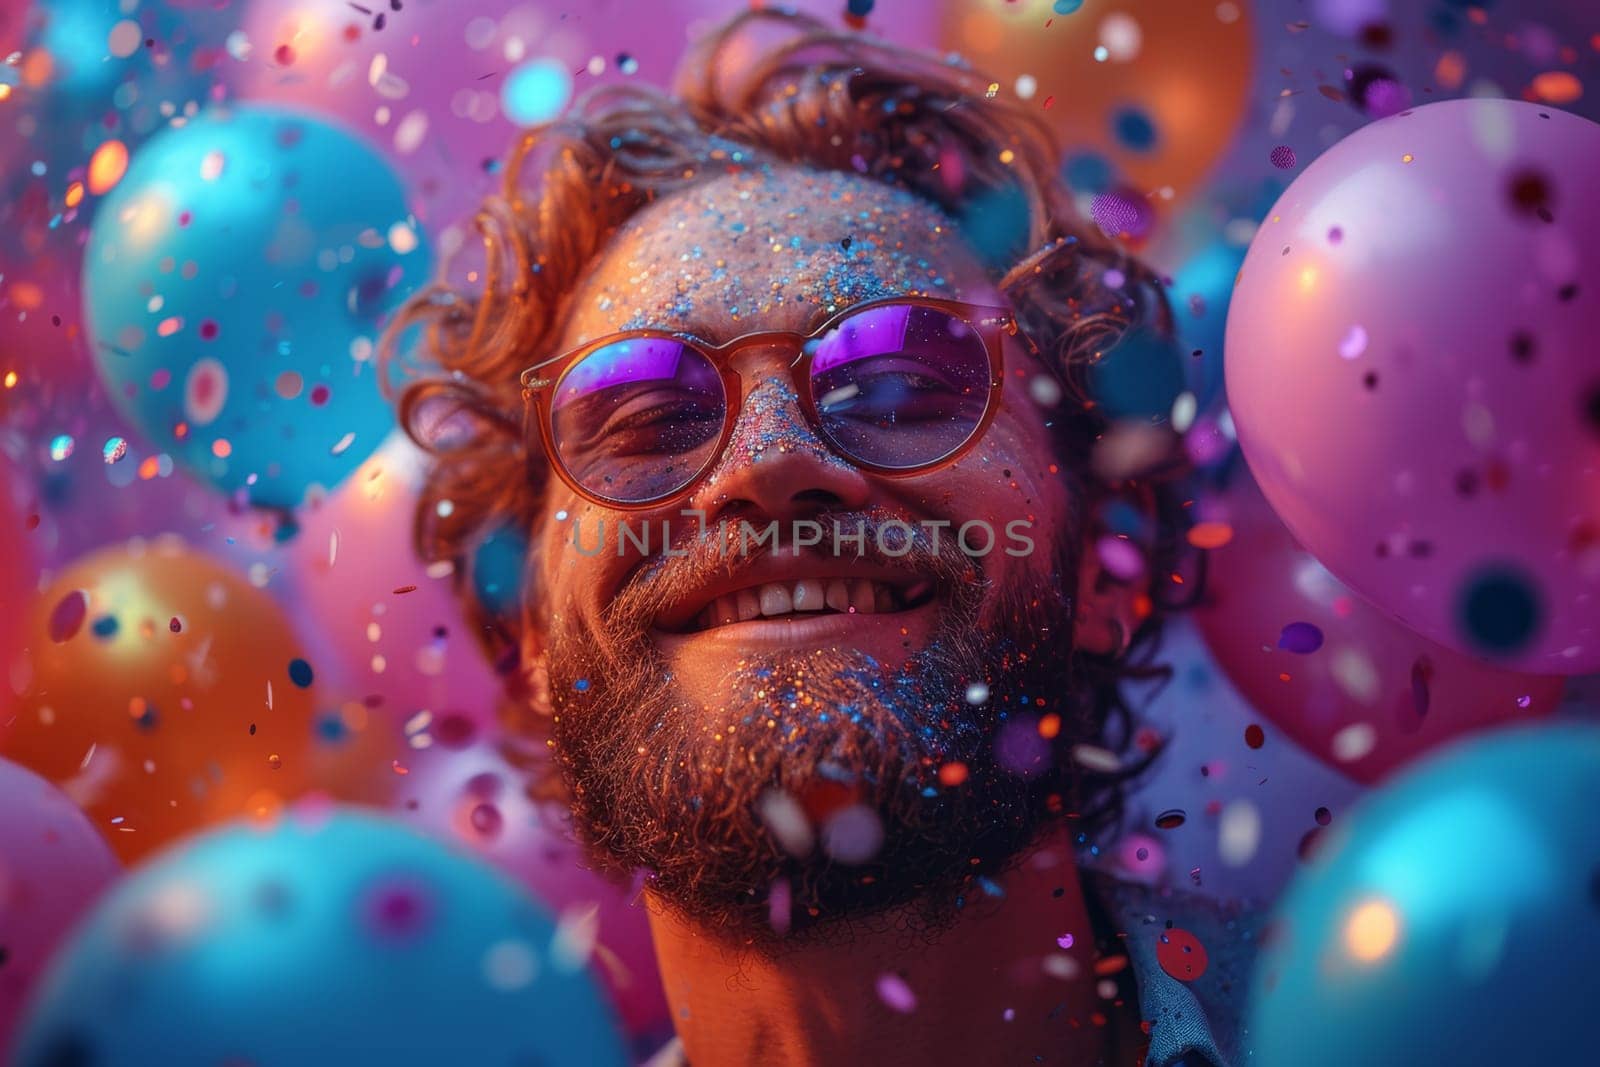 A happy cheerful man rejoices in bright multicolored balloons.